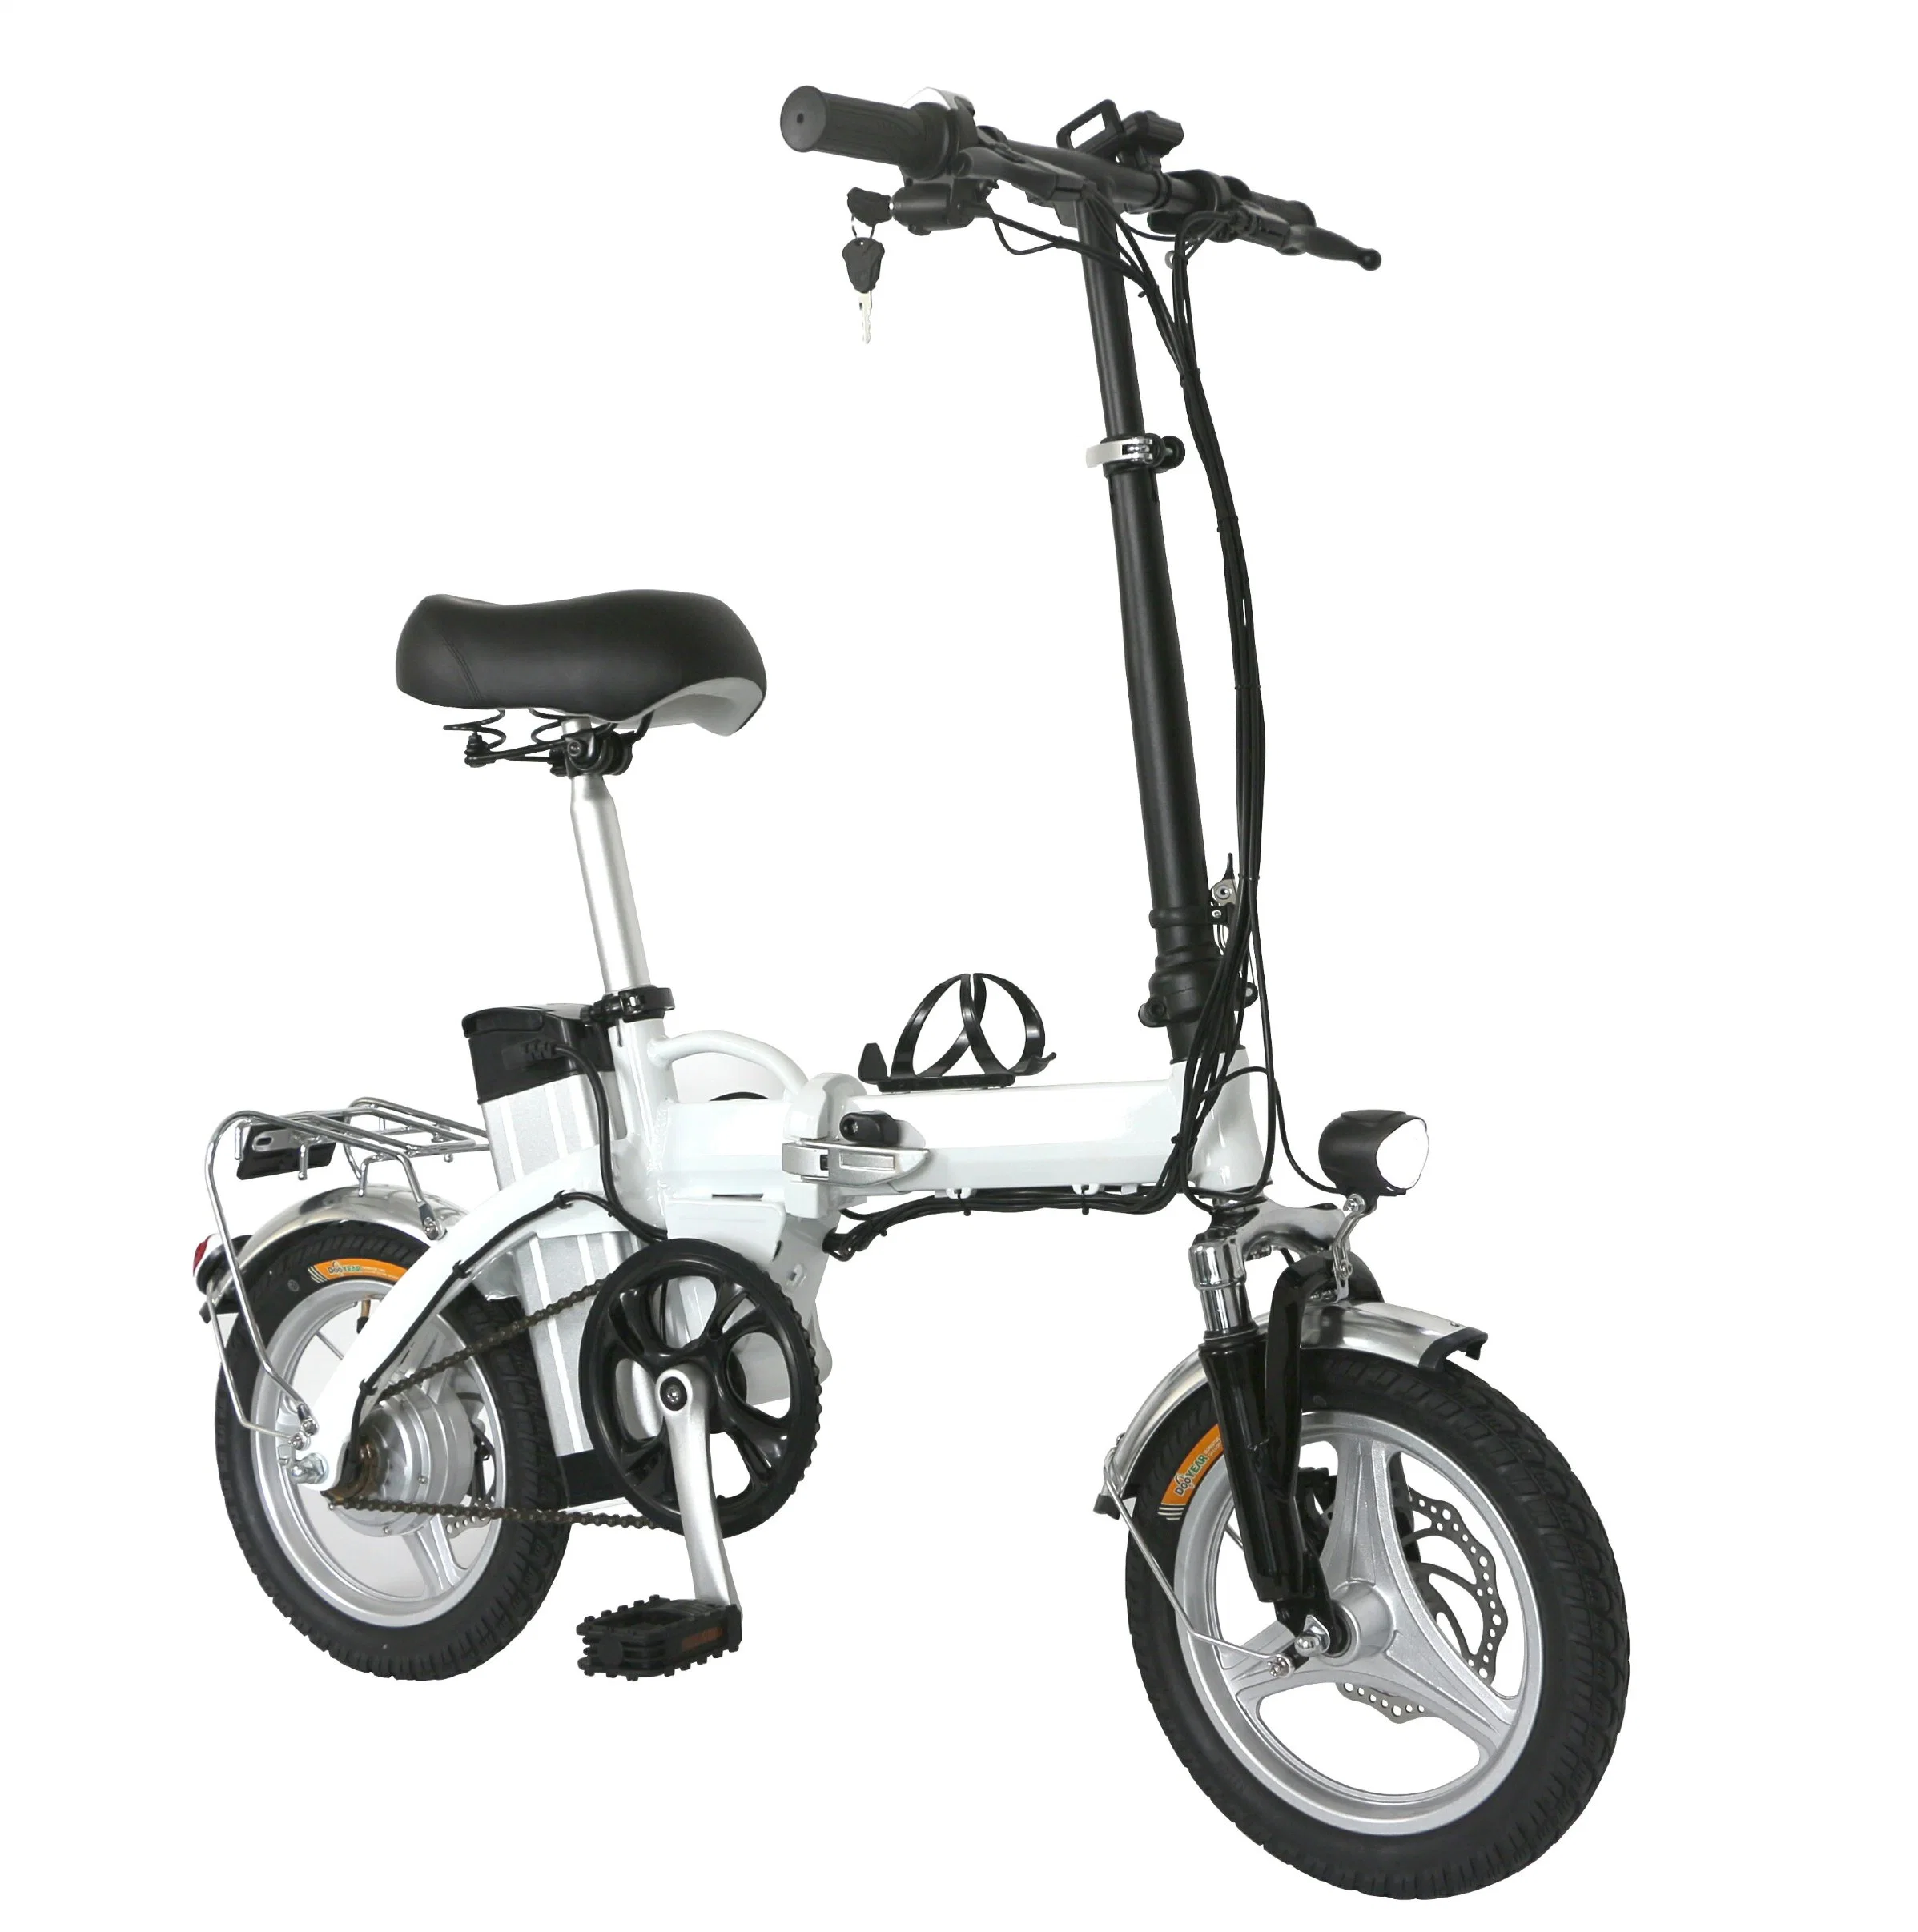 CE Certification Foldable Adult Ebike Fat Tires Electric Bike Bicycle 250W Motor 36V